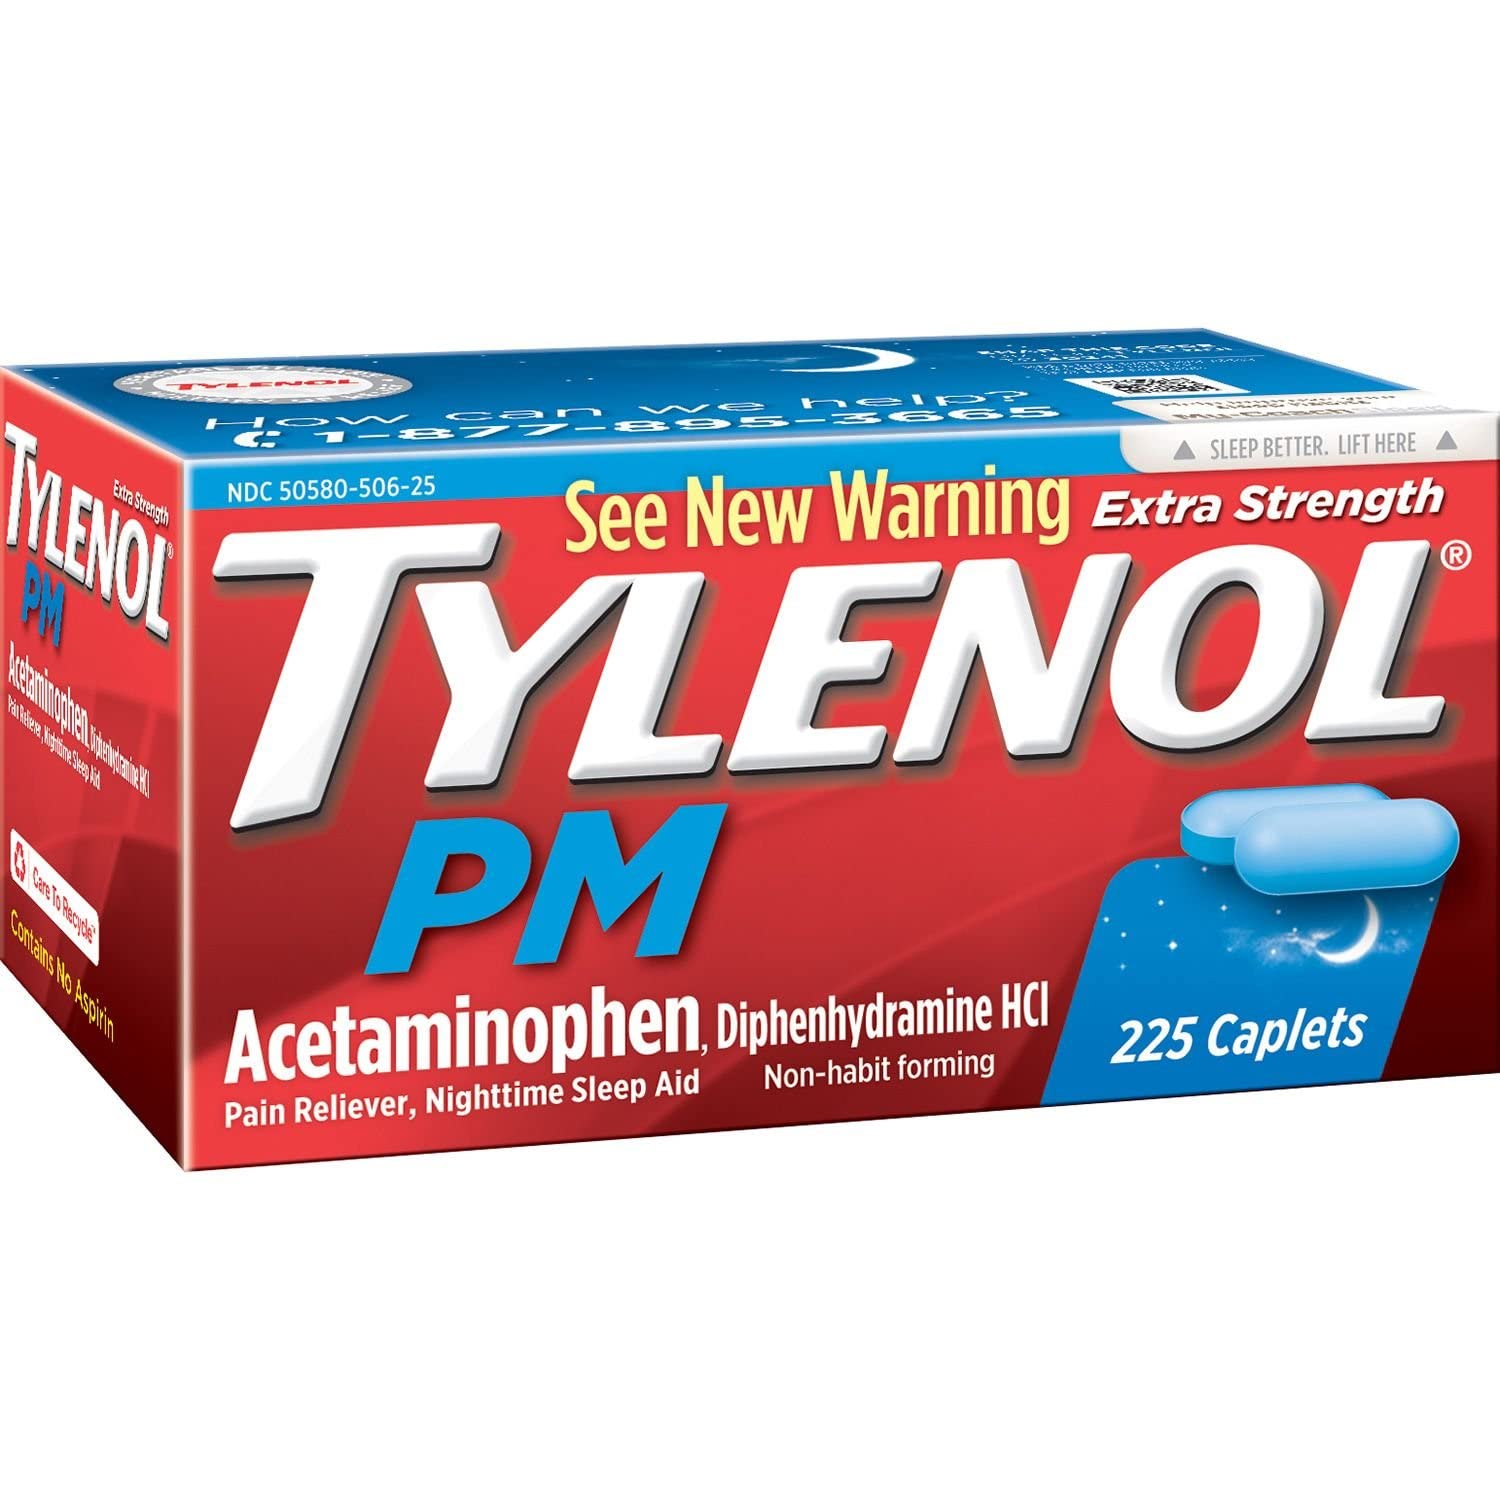 Tylenol Pm Extra Strength Pain Reliever  Sleep Aid, 225-caplets ( 1 Pack )